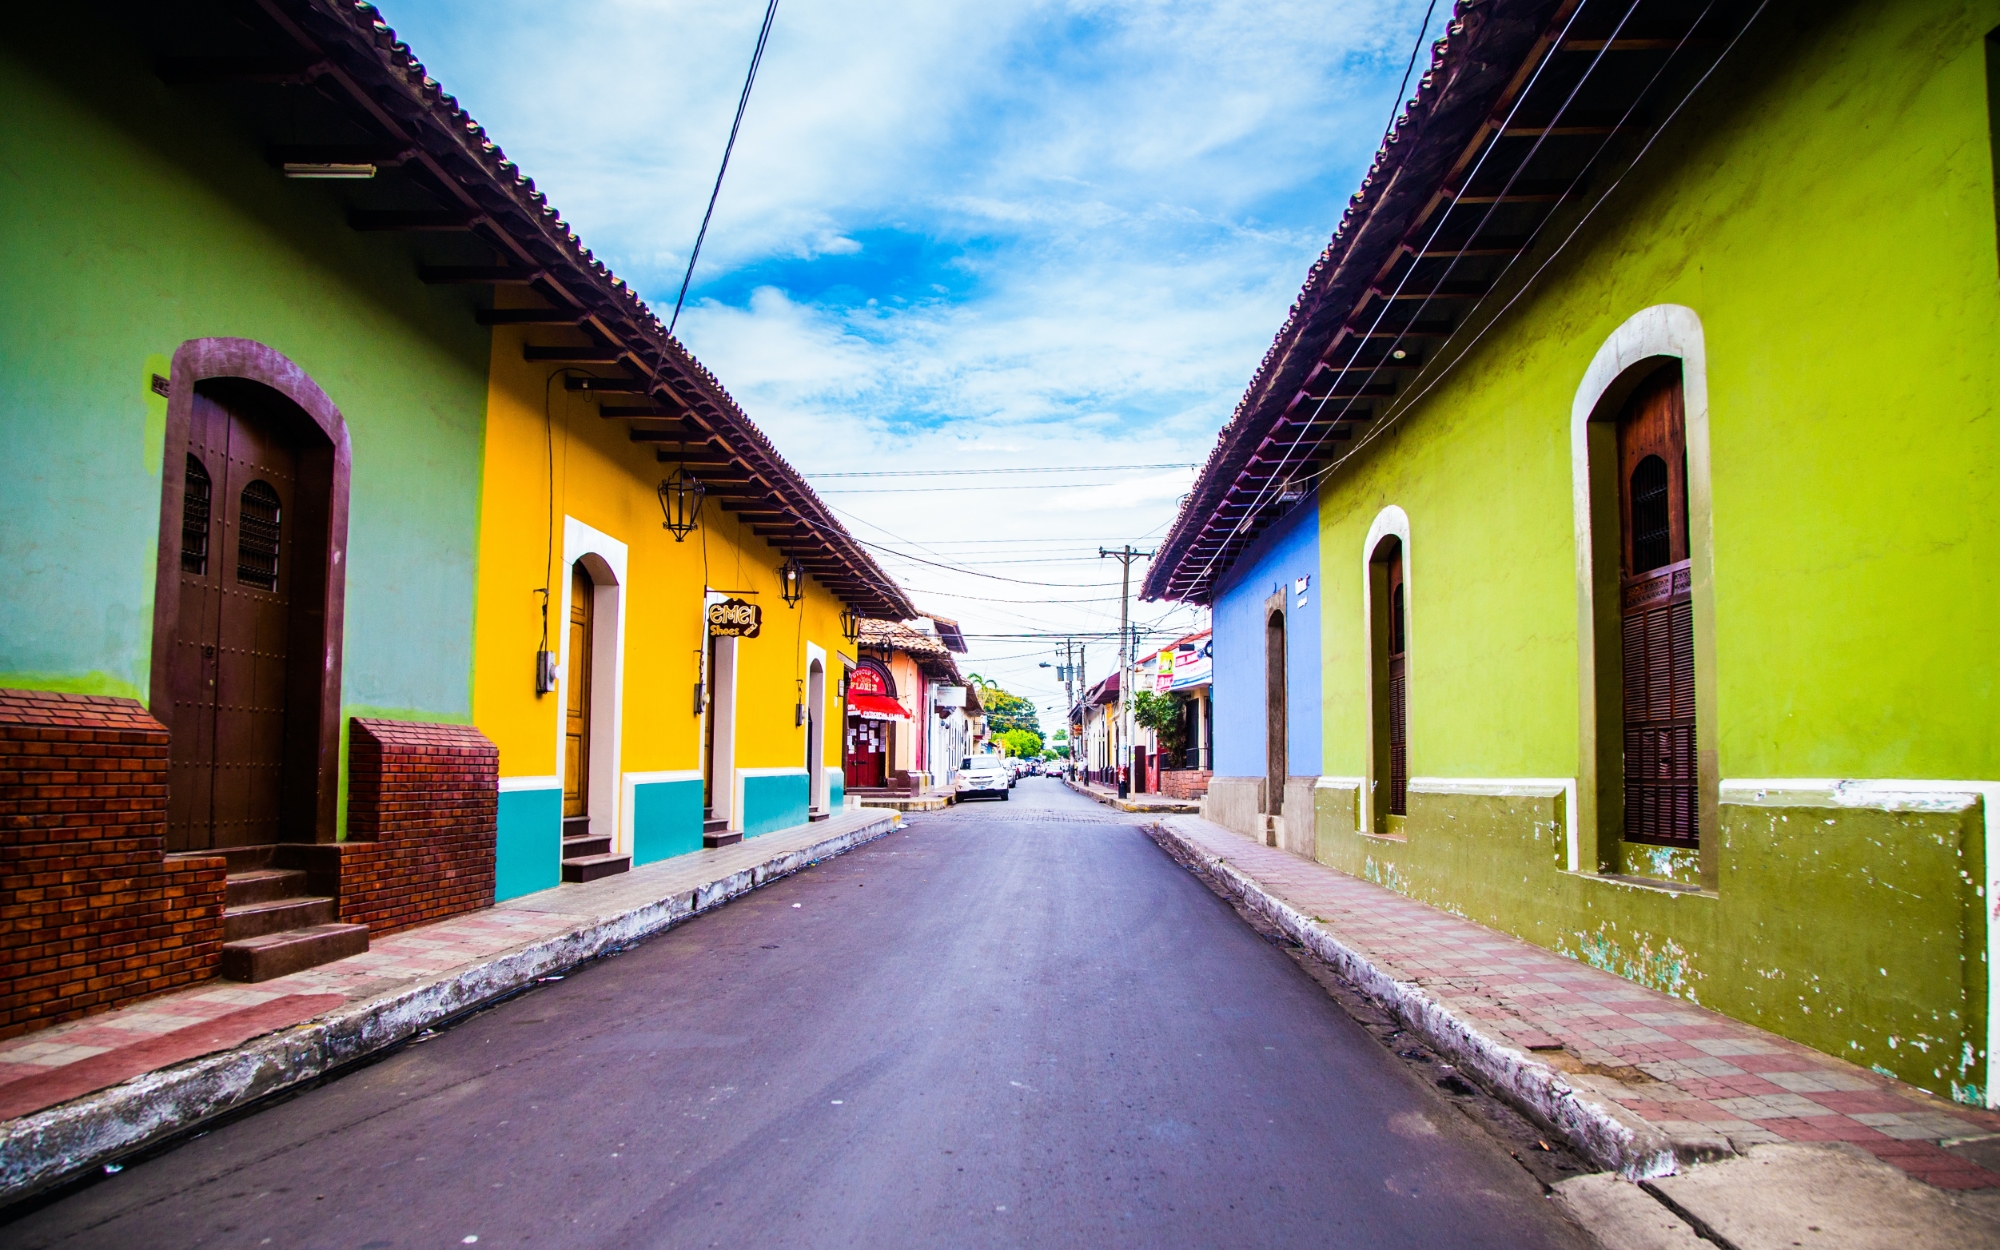 A narrow street in Nicaragua adorned with colorful buildings.